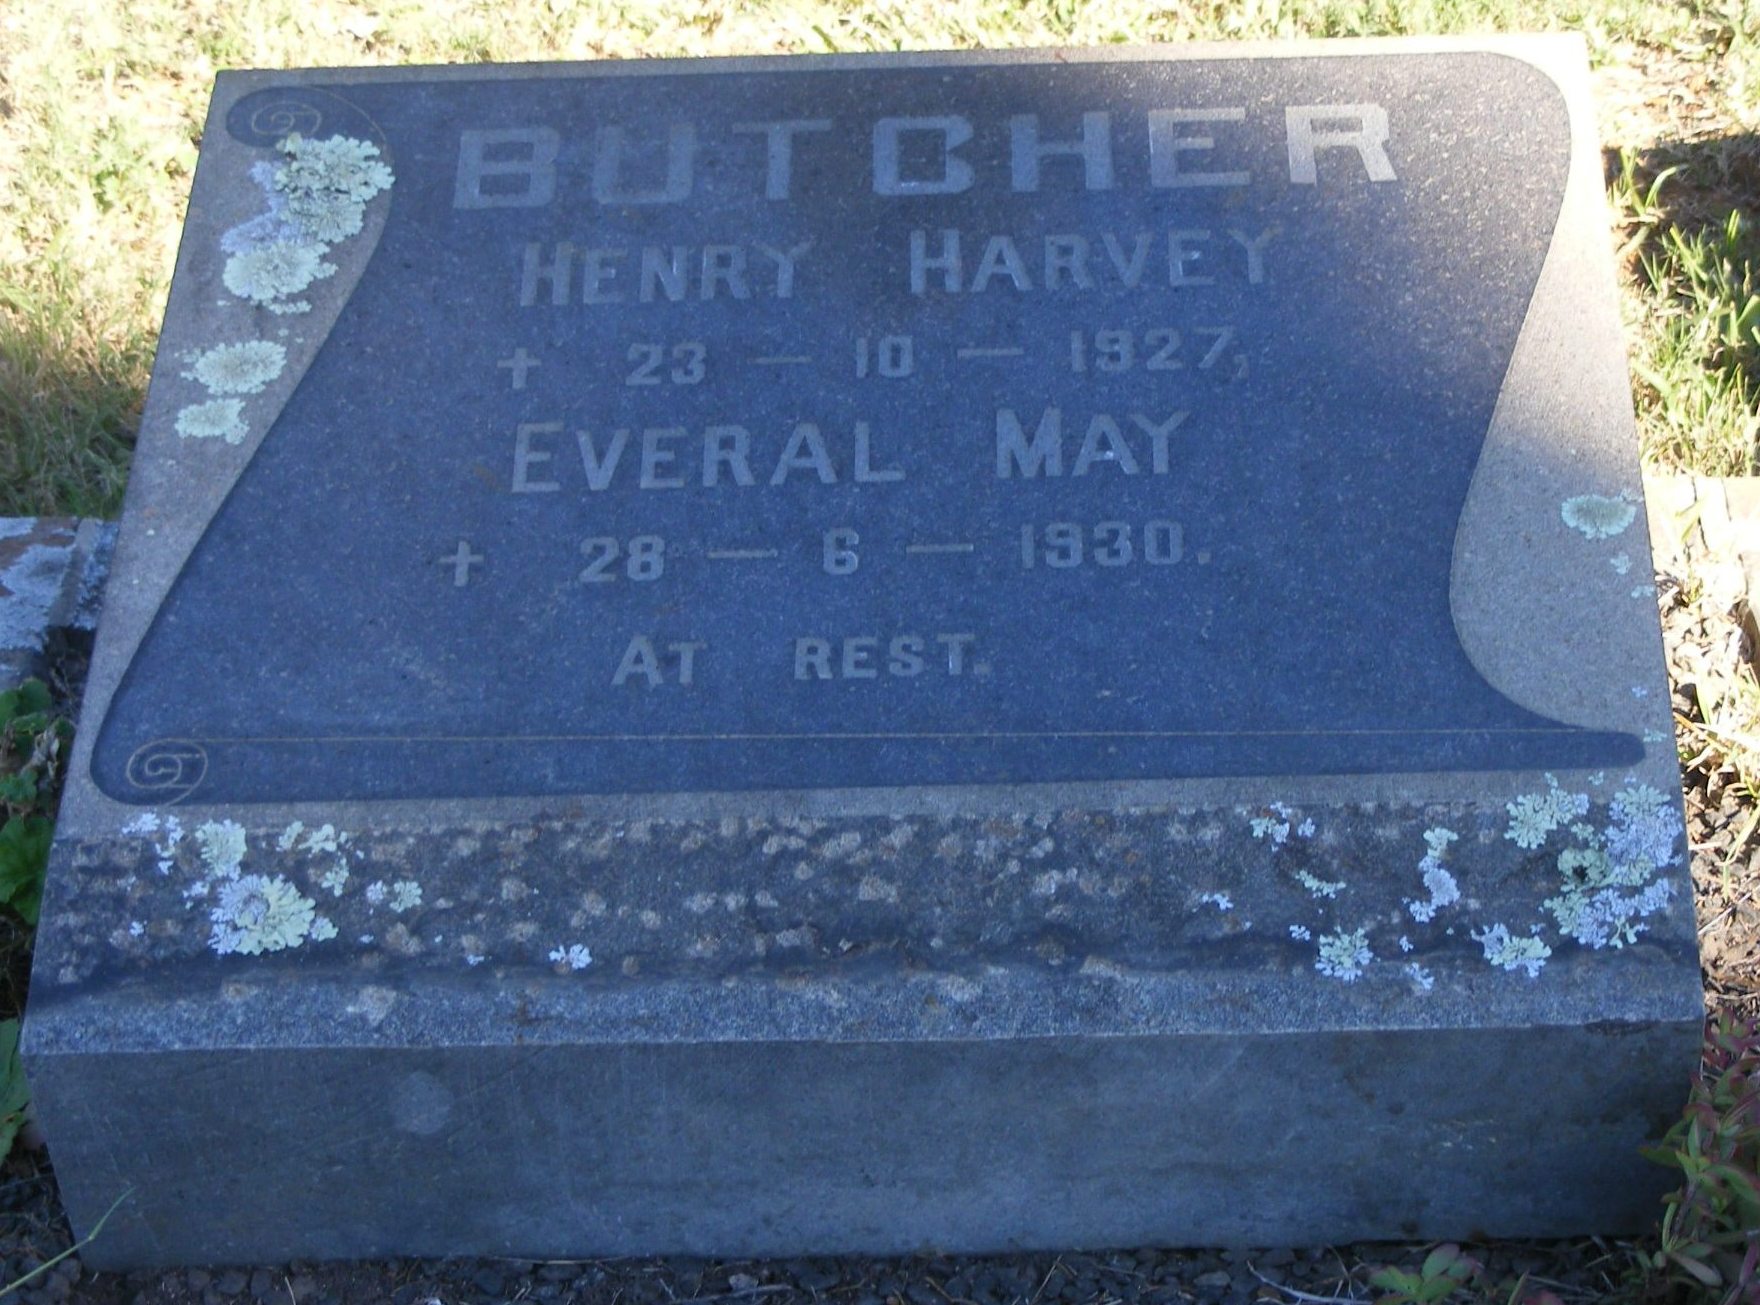 BUTCHER Henry Harvey -1927 & Everal May -1930